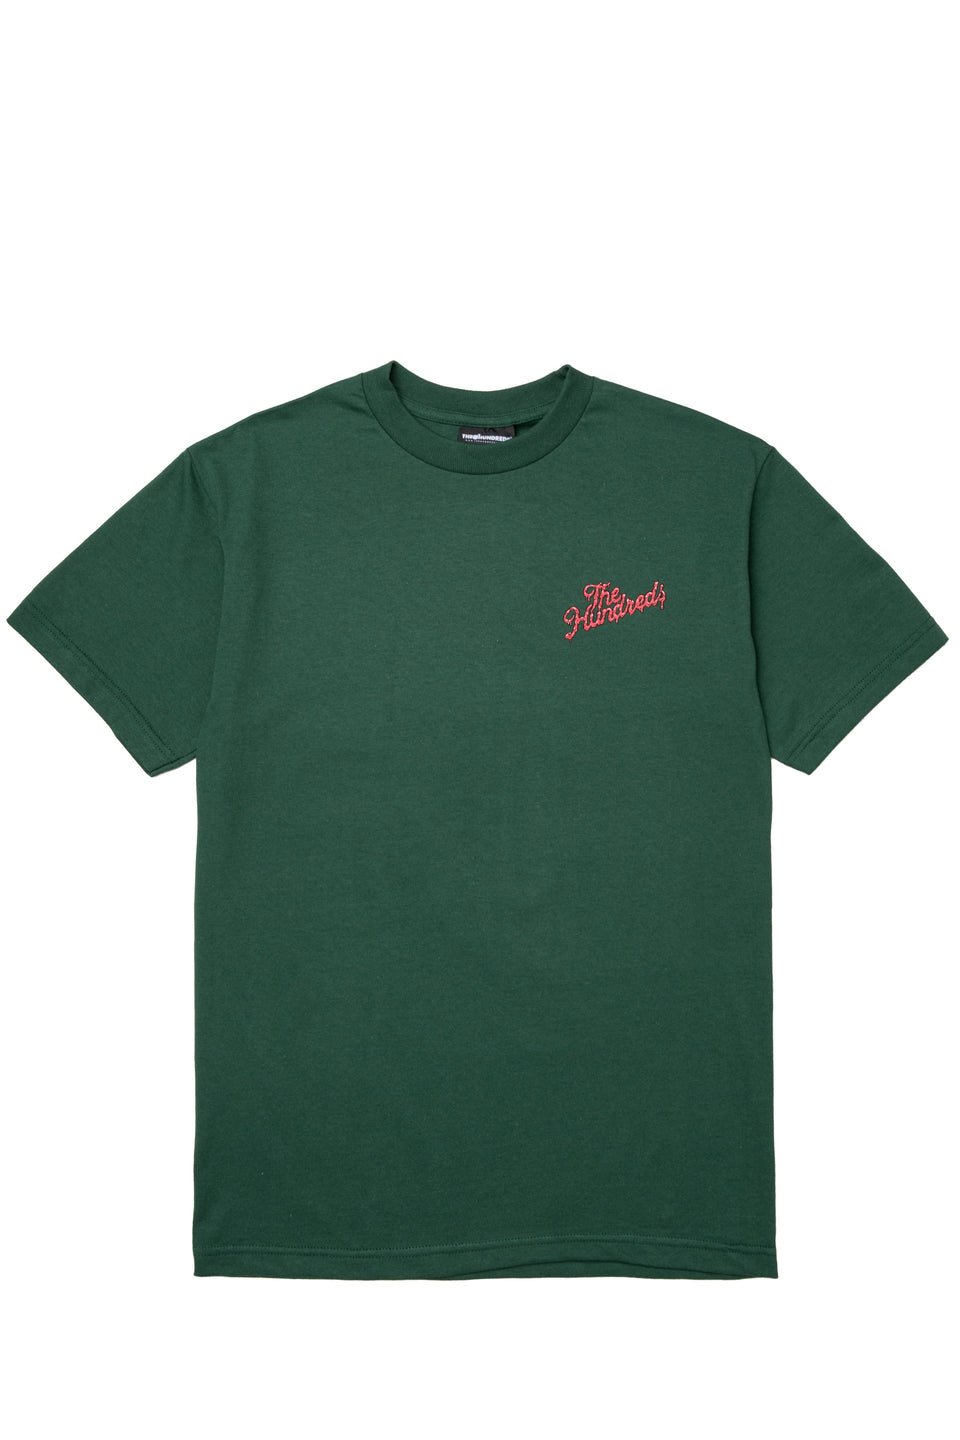 Tops – The Hundreds